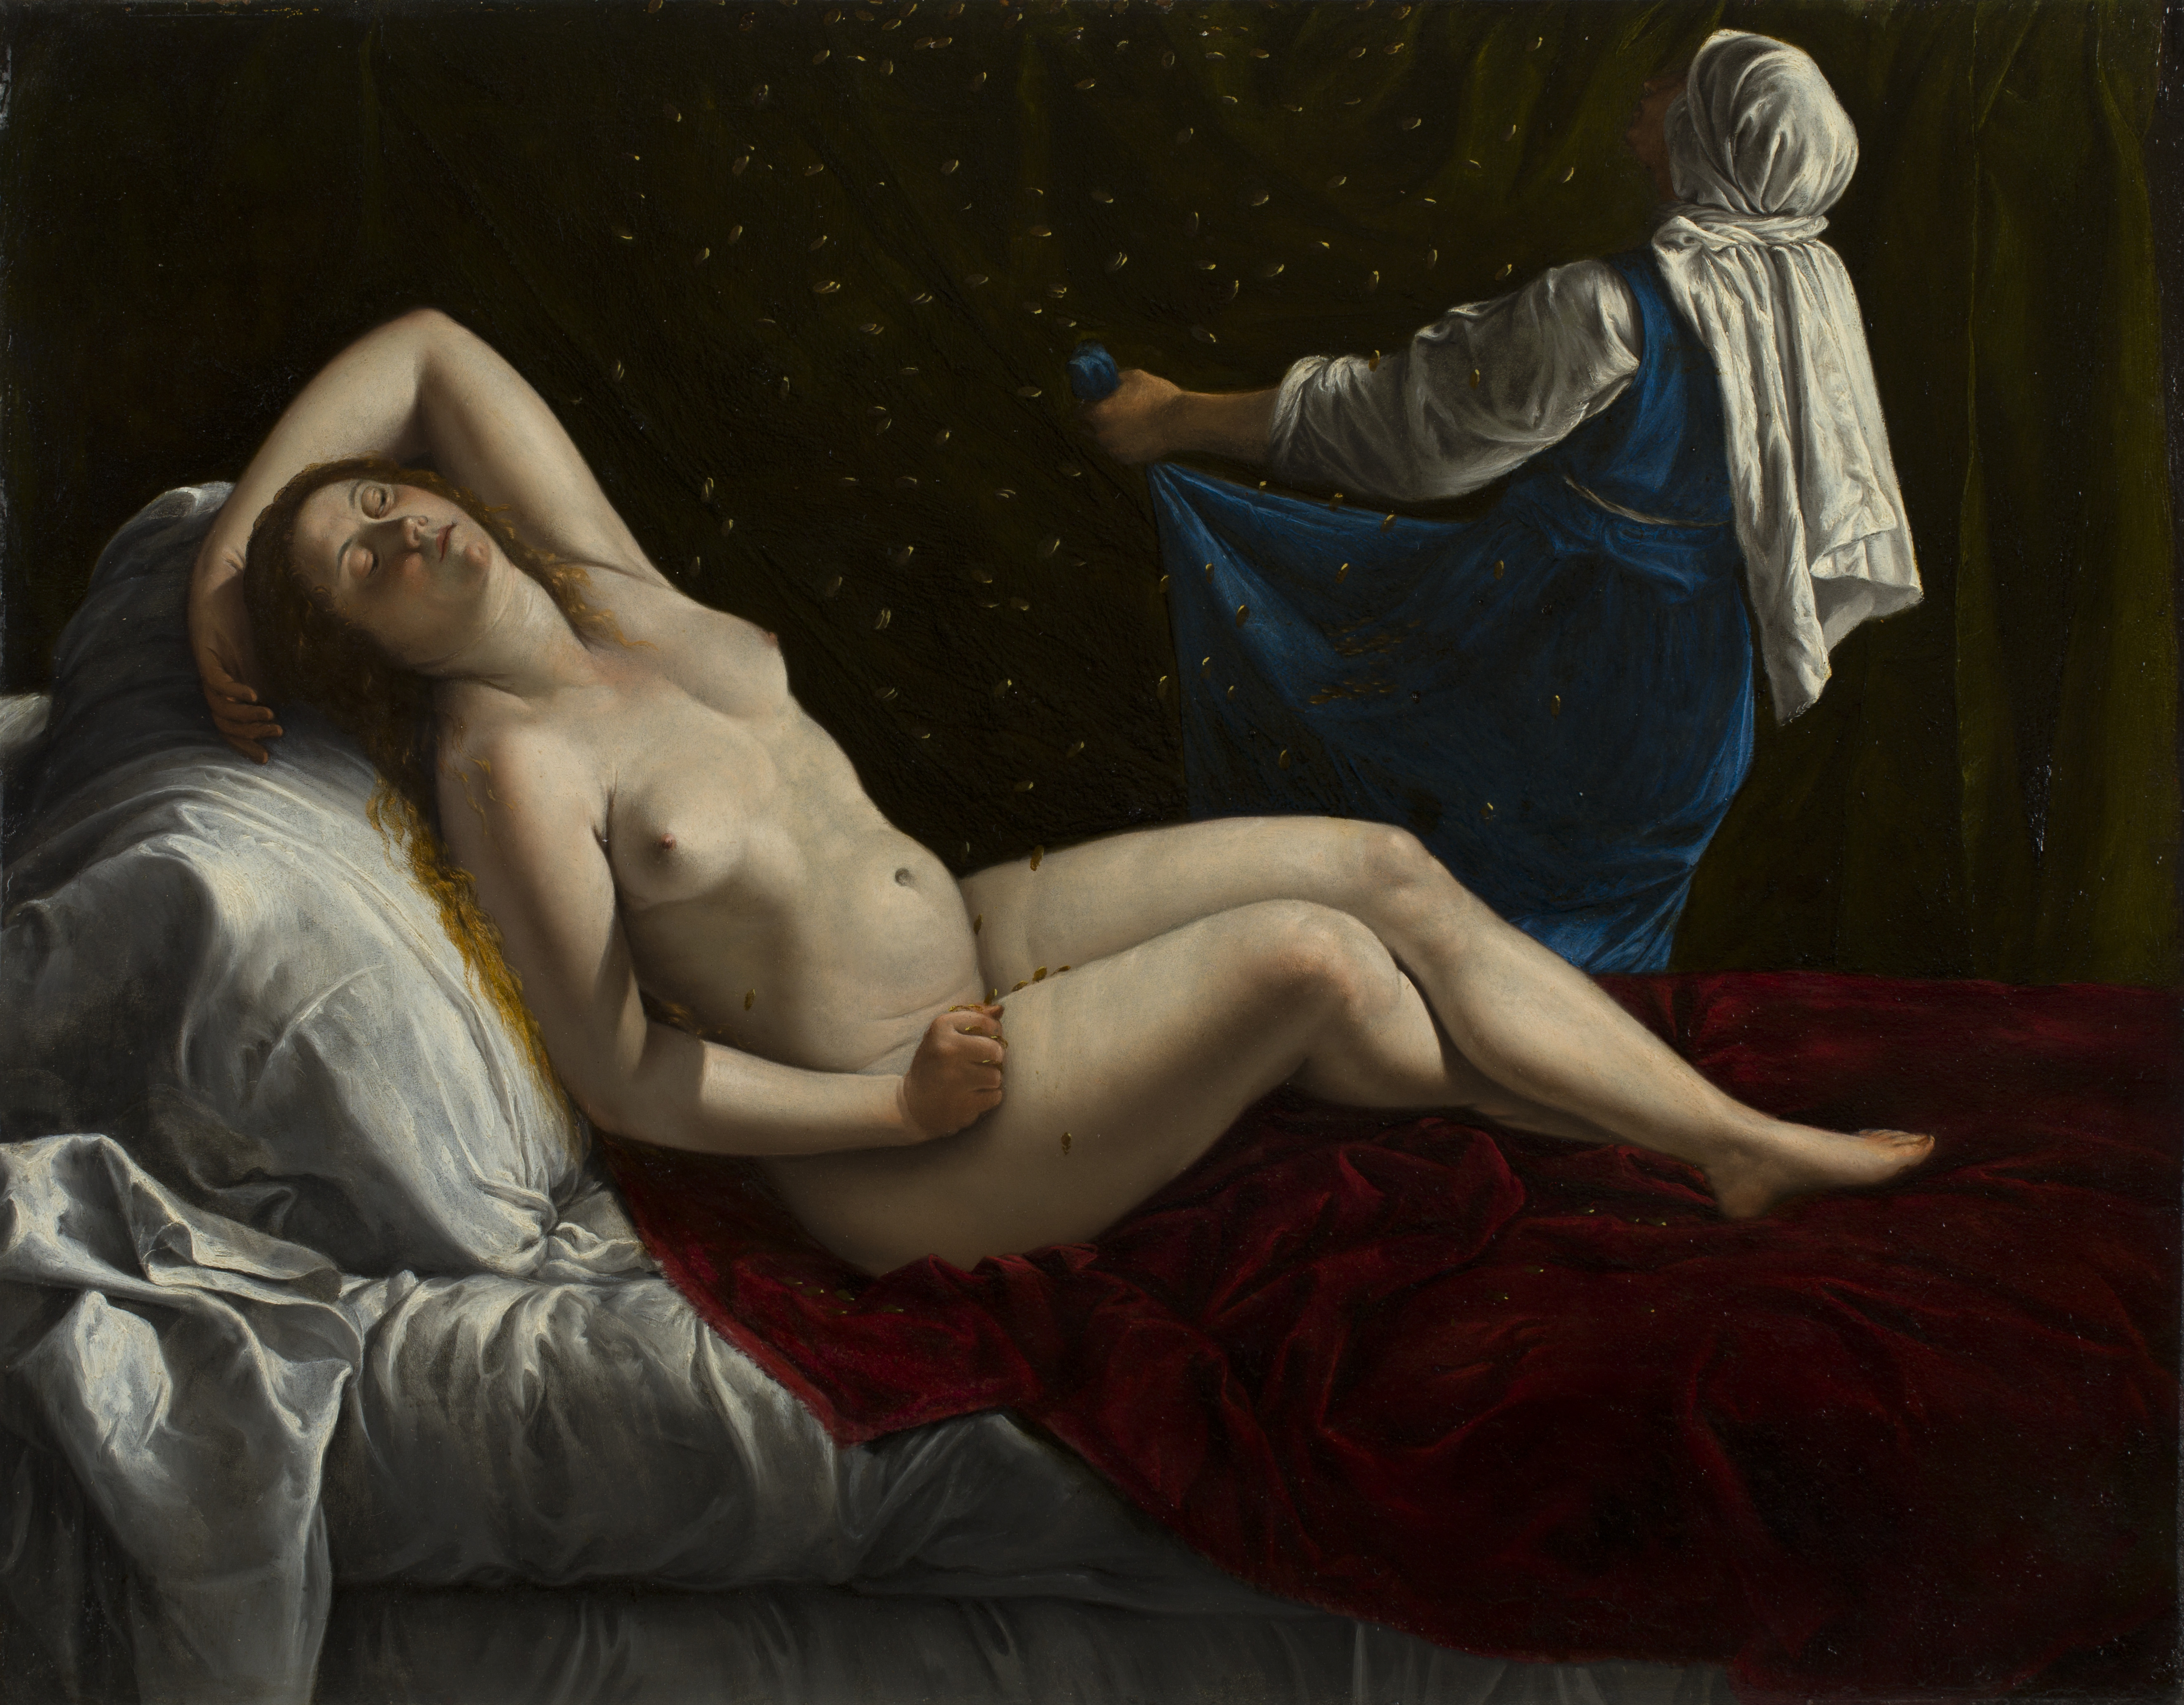 A nude woman reclines on a bed made with white sheets and a red velvet cover. She has one arm up behind her head and the other resting on her thigh, with her eyes closed. Behind her, a woman in a blue dress with a white chemise and head covering lifts up her skirt to catch gold coins that fall from above onto Danaë. 